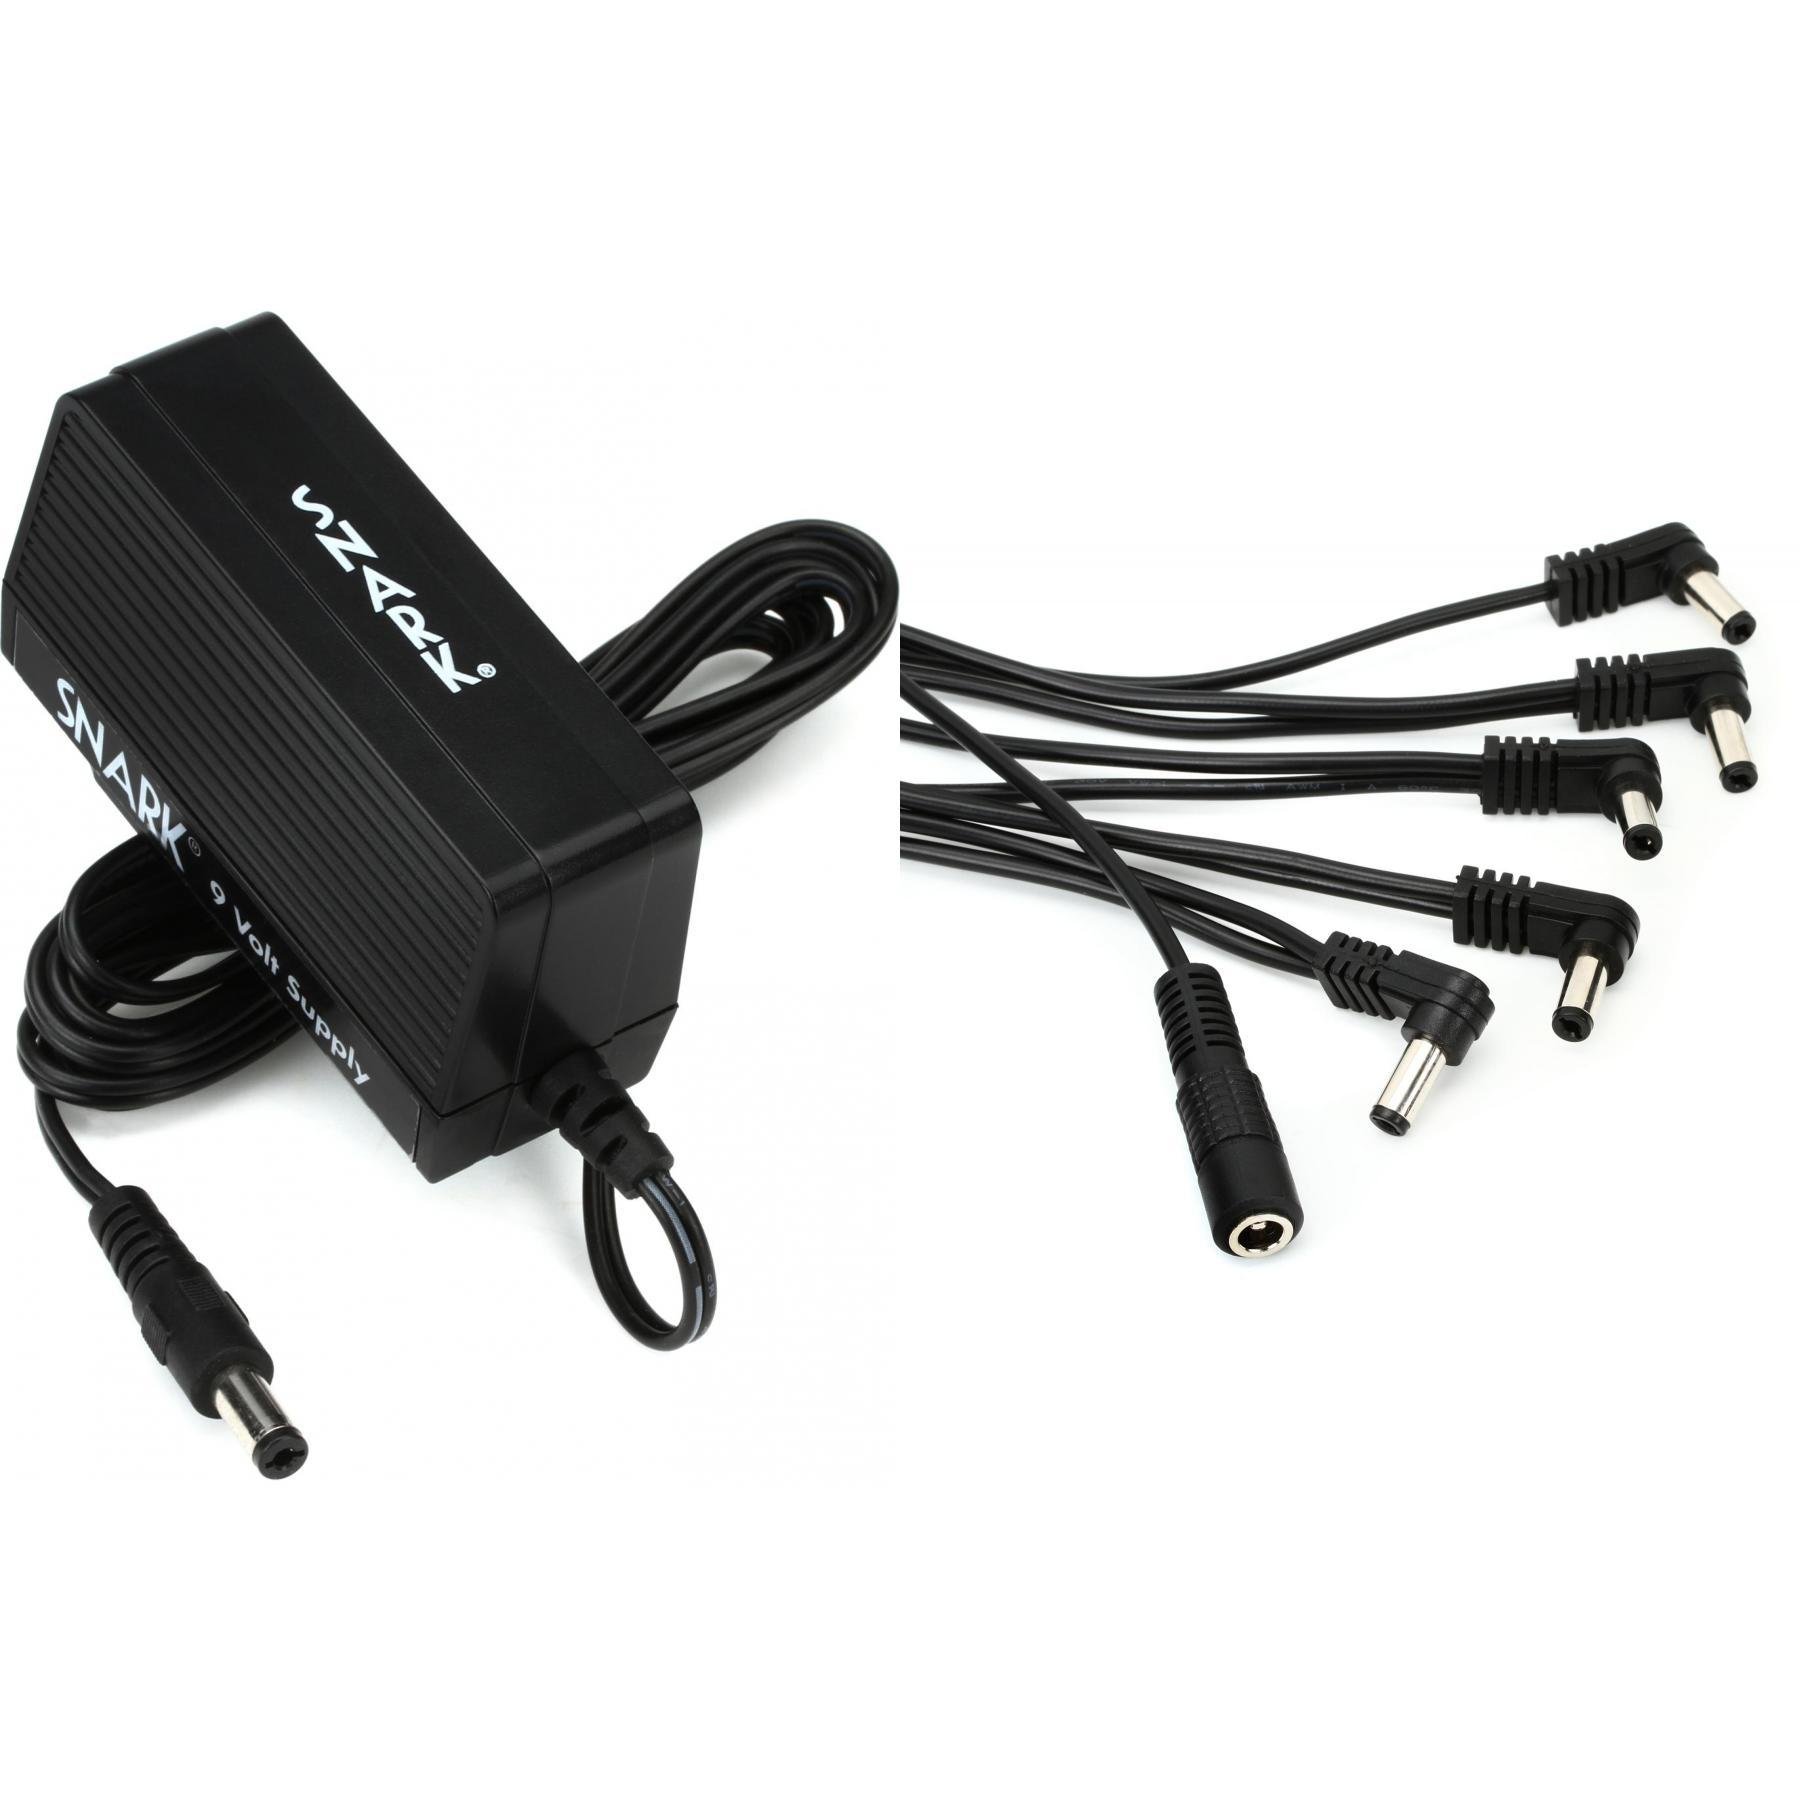 9V EFFECTS PEDAL POWER SUPPLY ADAPTER & 6 7 8 9 WAY DAISY CHAIN TC ELECTRONICS 